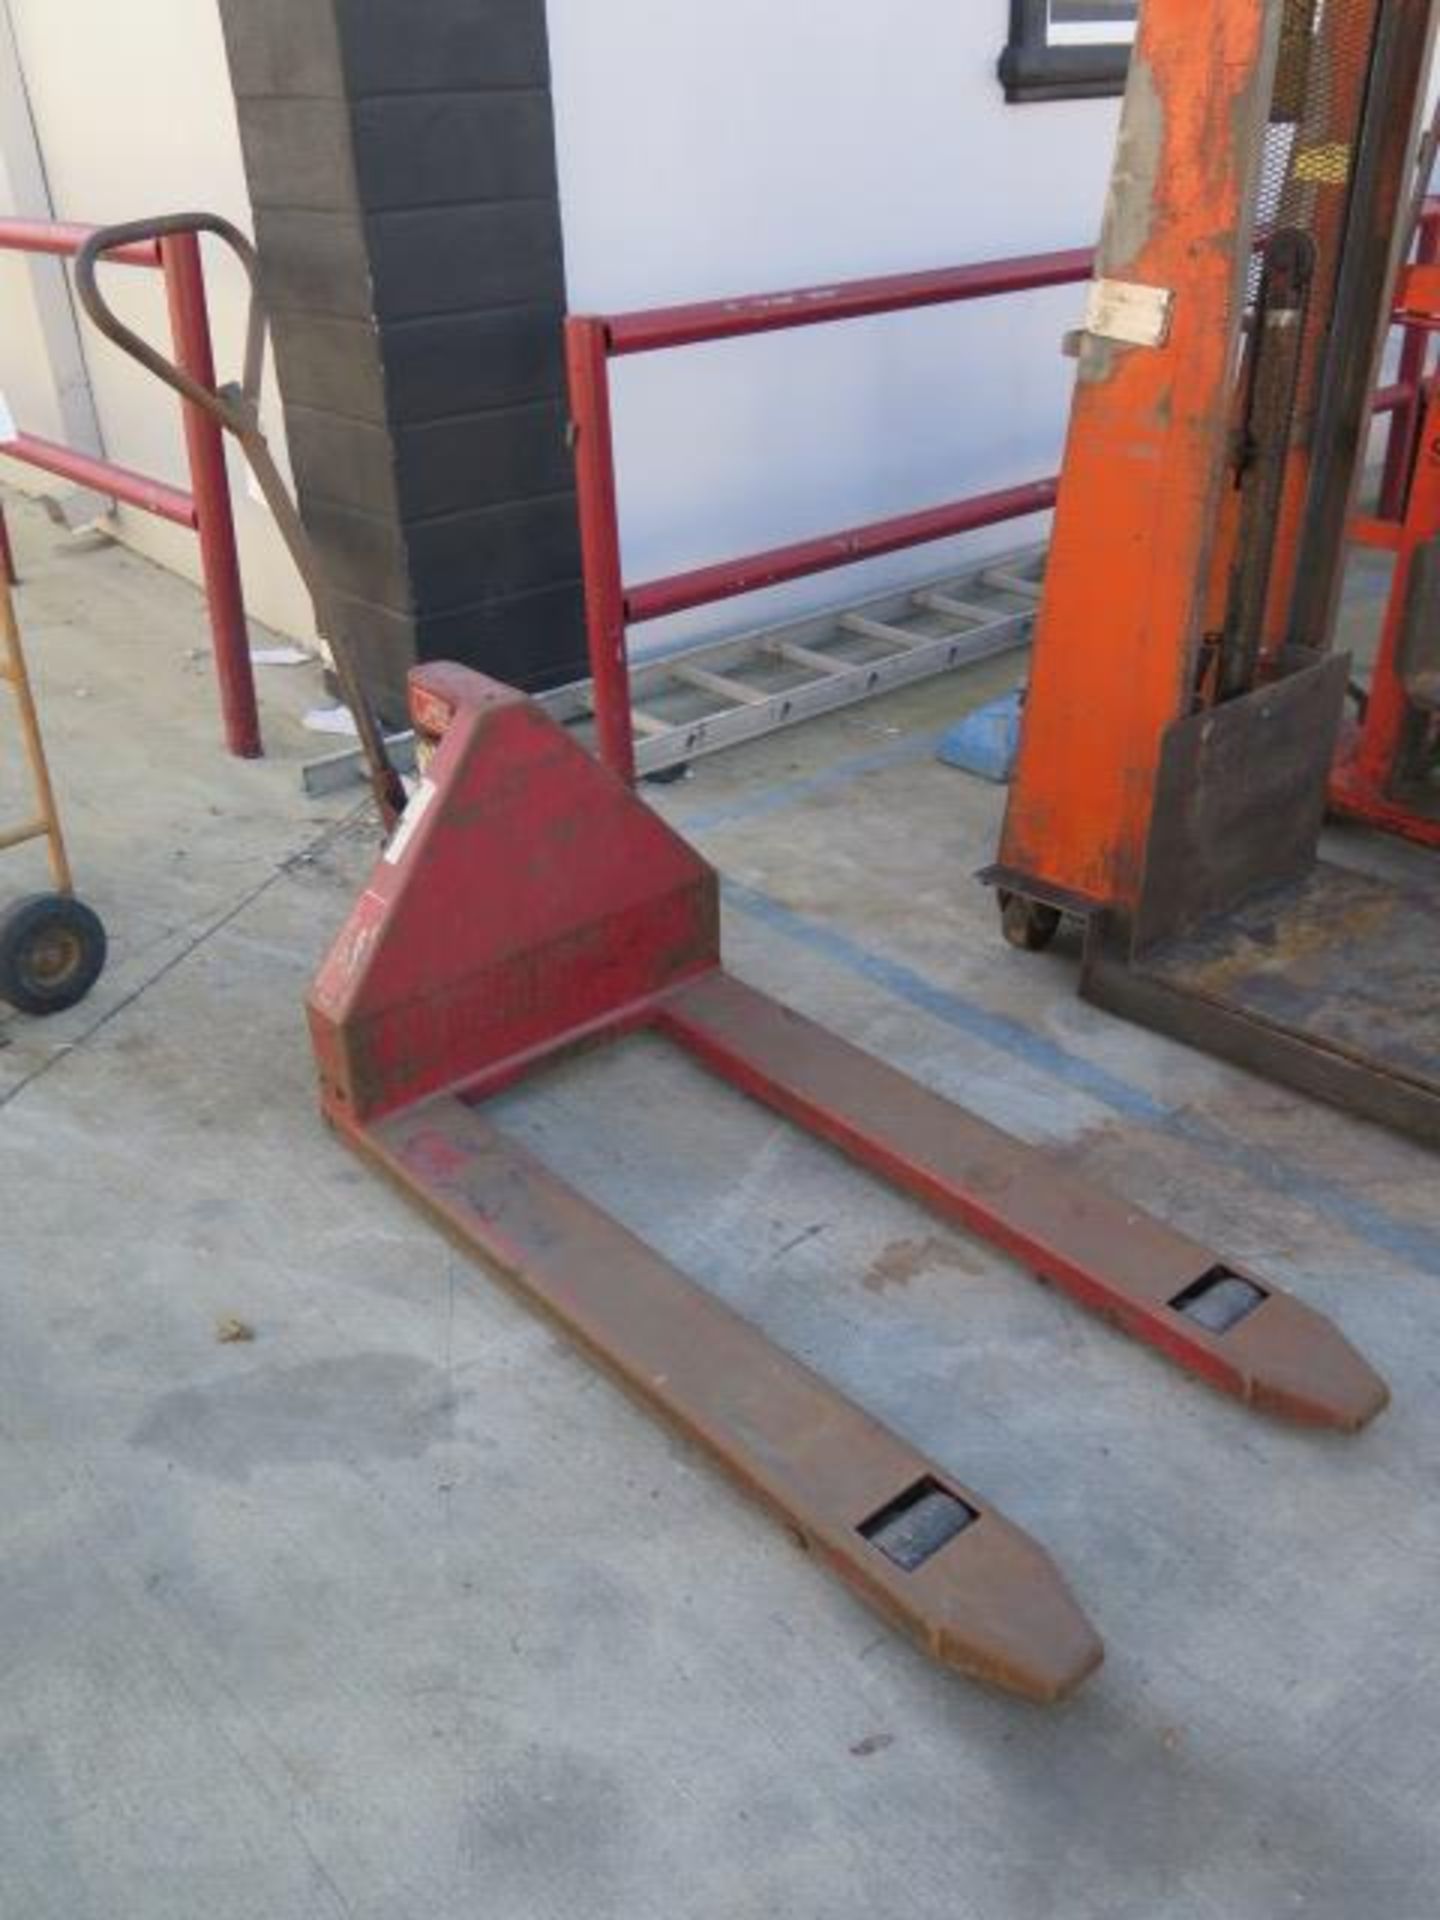 Dayton Pallet Jack (SOLD AS-IS - NO WARRANTY) - Image 2 of 3